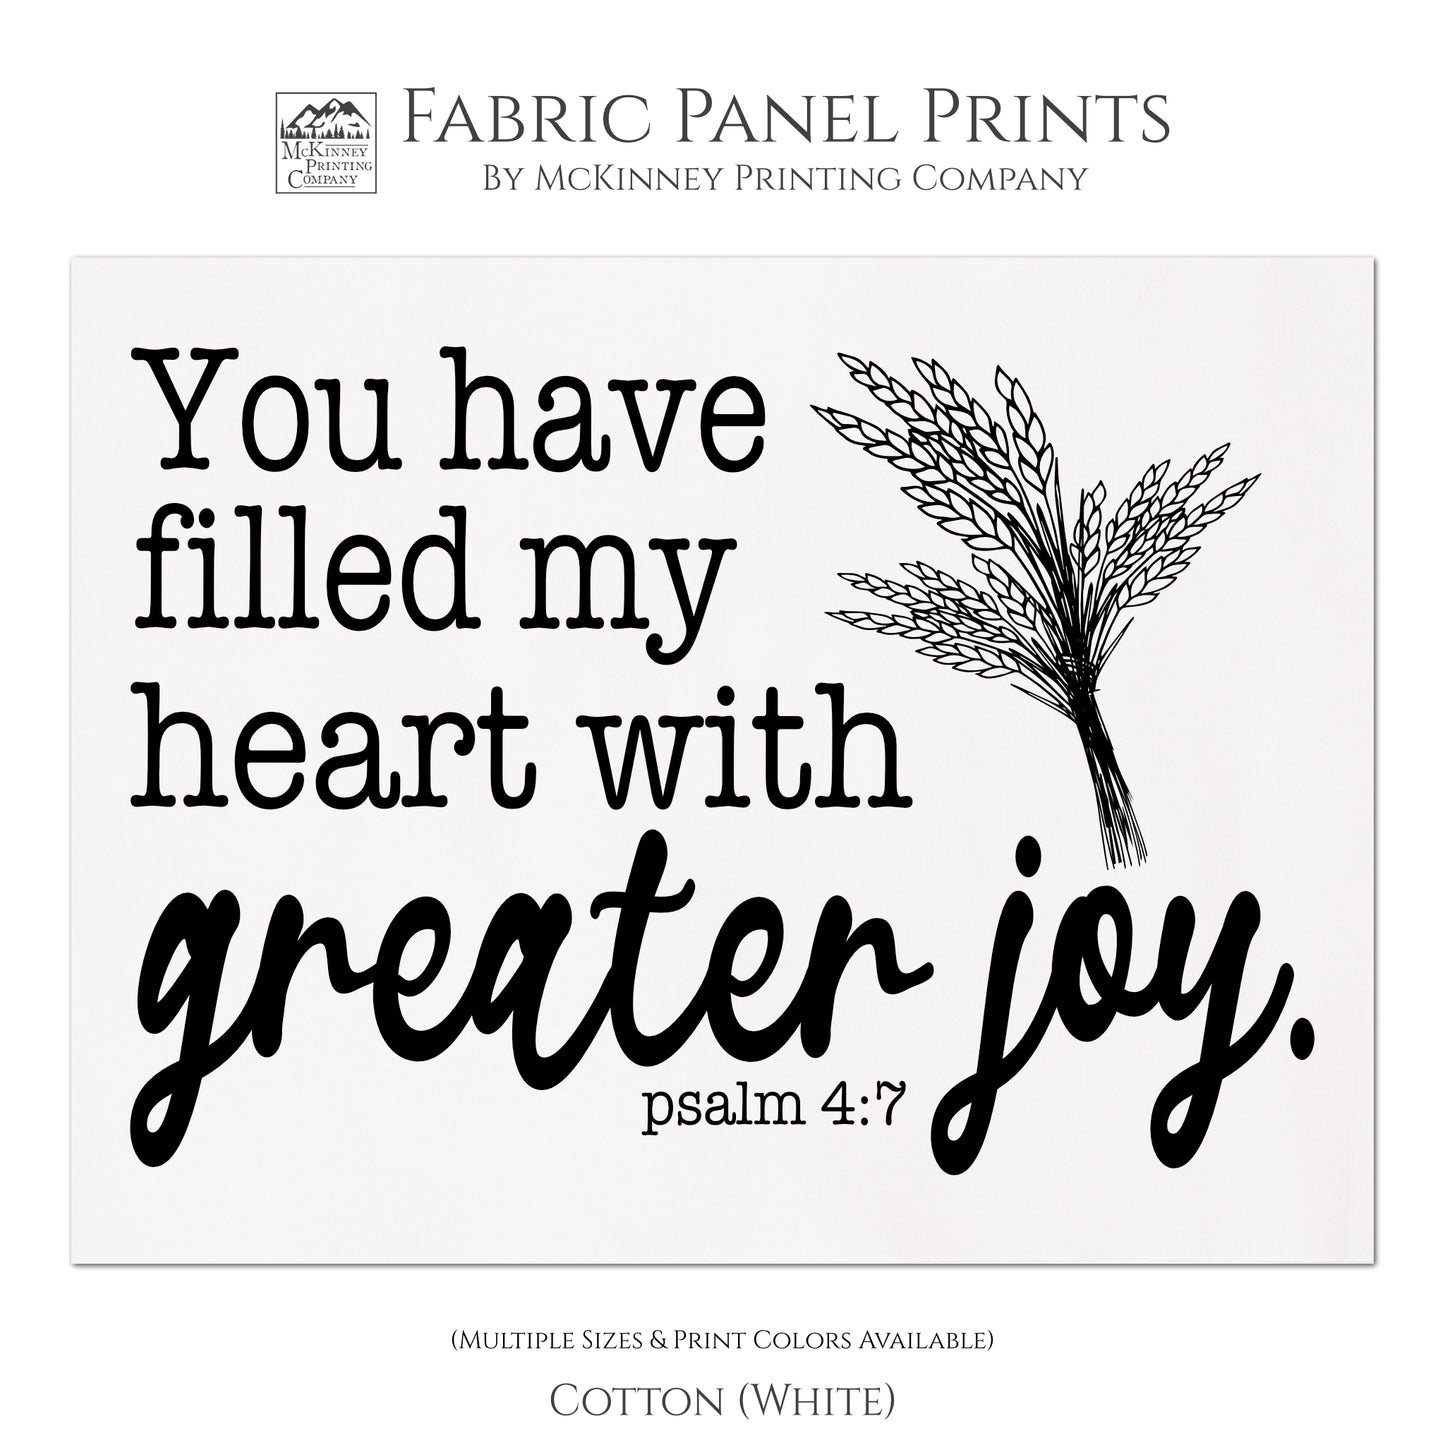 You have filled my heart with greater joy - Psalm 4 7, Scripture Fabric, Religious Fabric, Quilt Block, Wall Hanging, Fabric Panel Print - Cotton, White